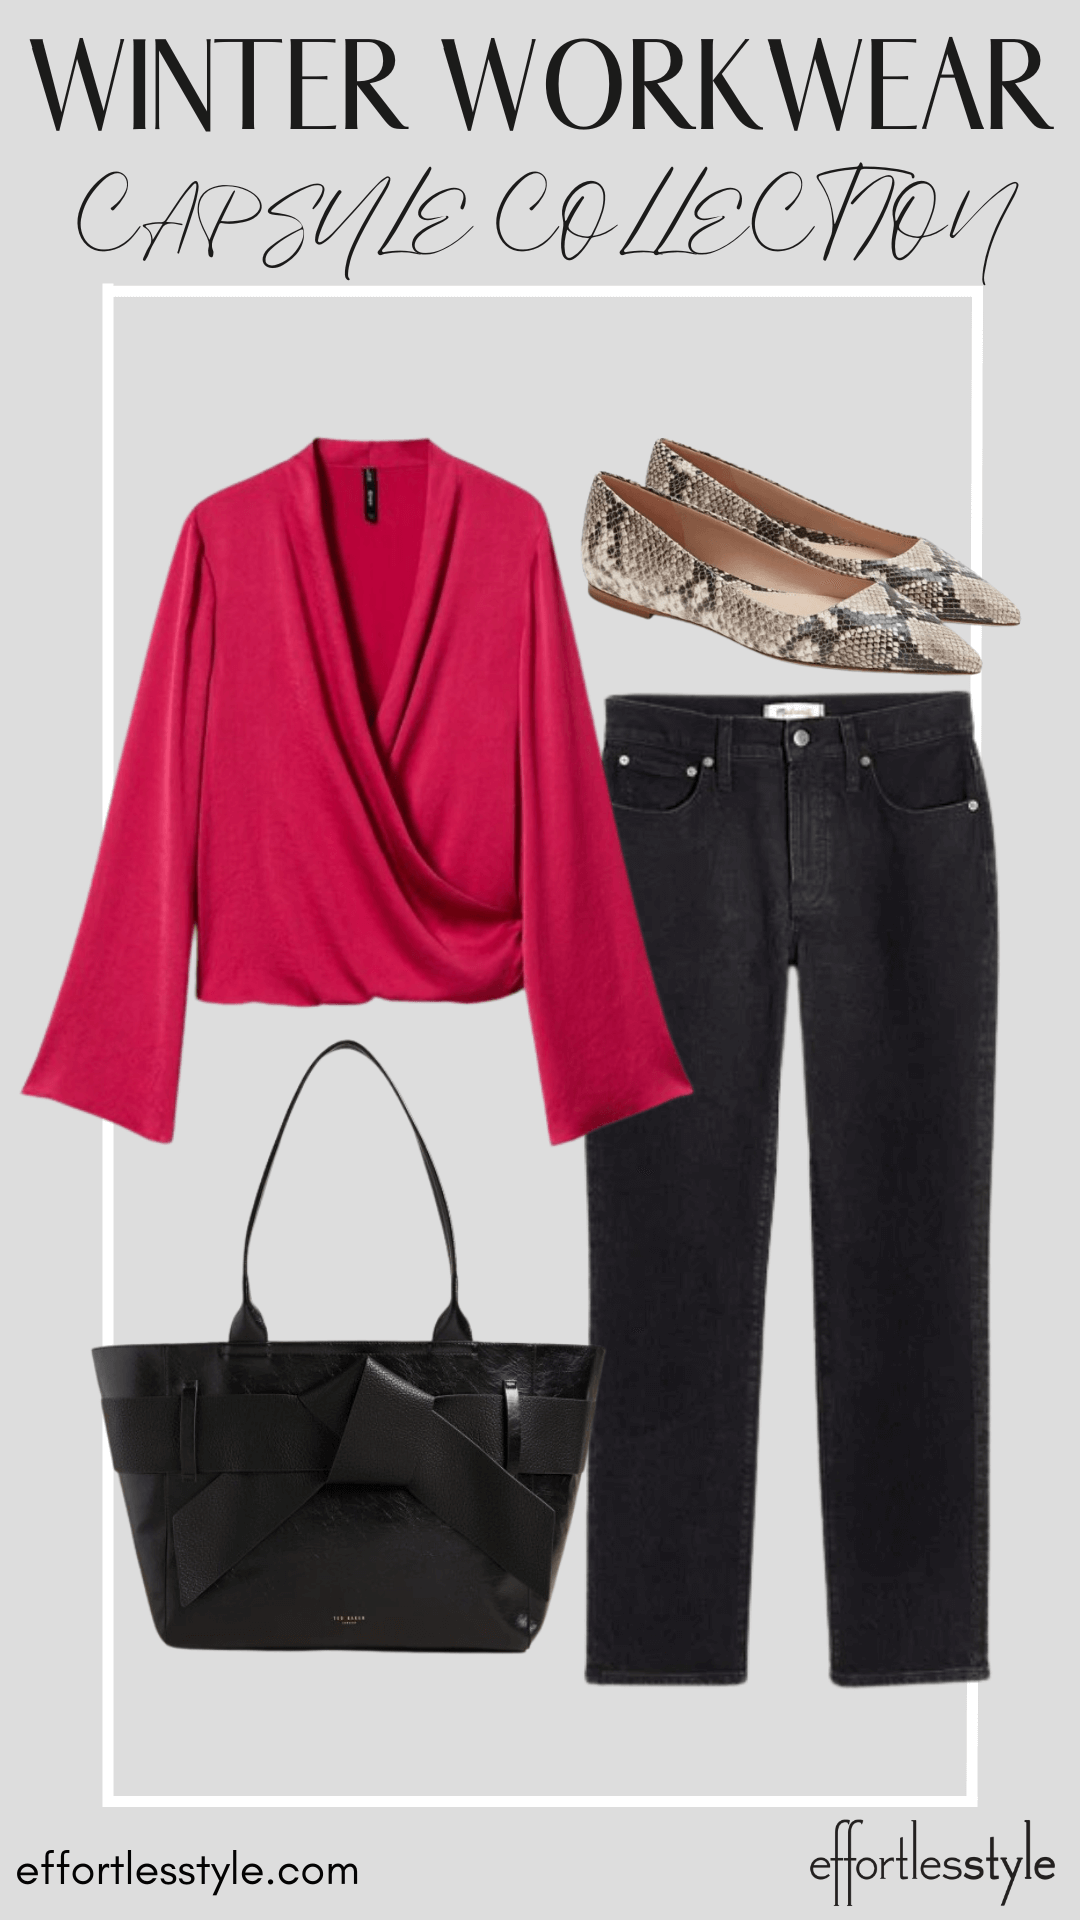 How To Wear Our Winter Workwear Capsule Wardrobe - Part 2 Long Sleeve Blouse & Black Jeans